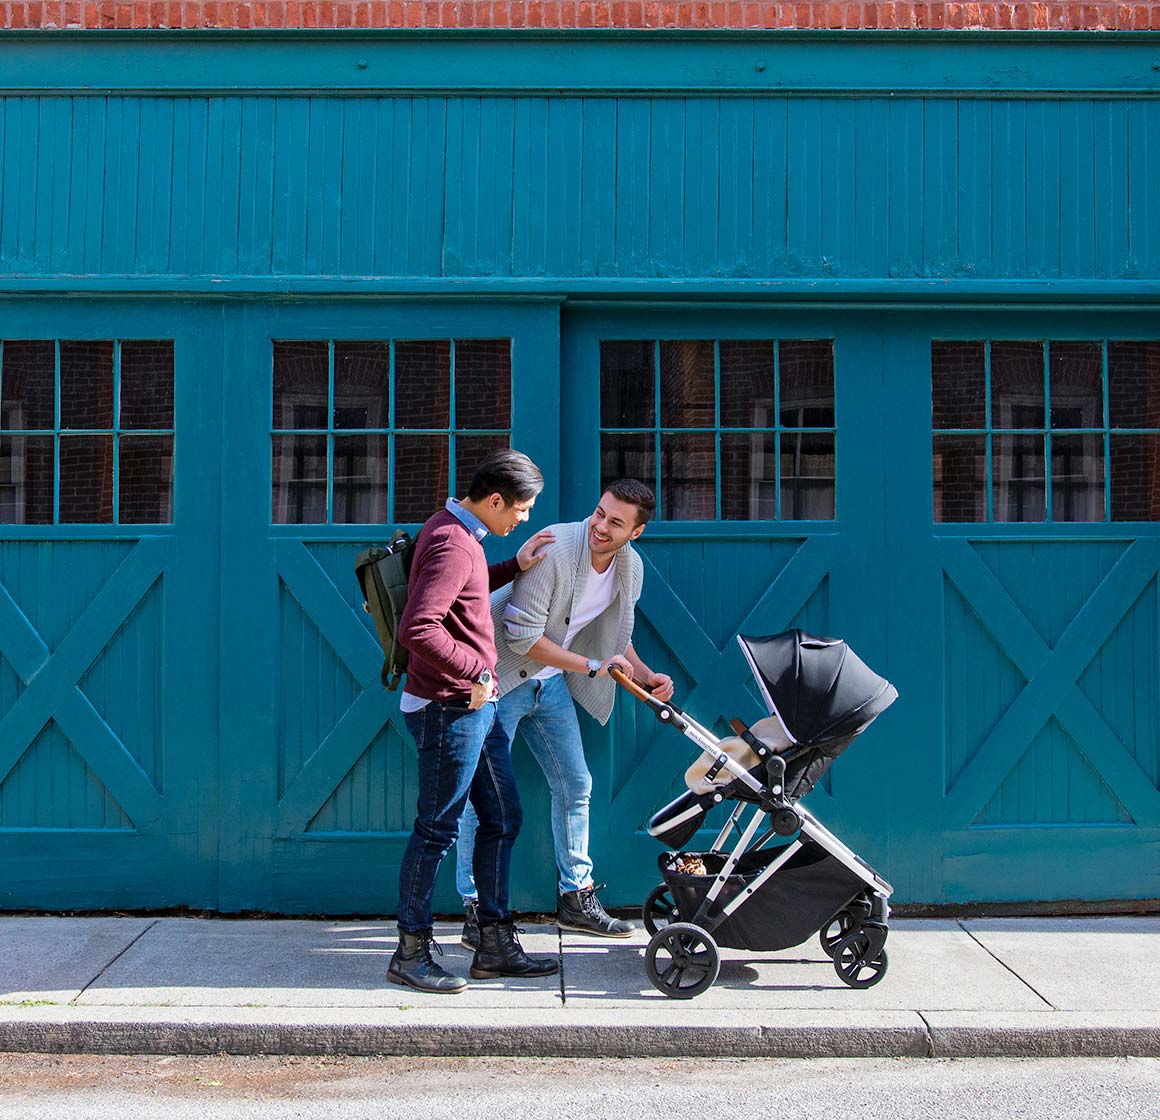 Two men, one pushing a stroller, talking and smiling on a city sidewalk in front of a teal building with large doors.